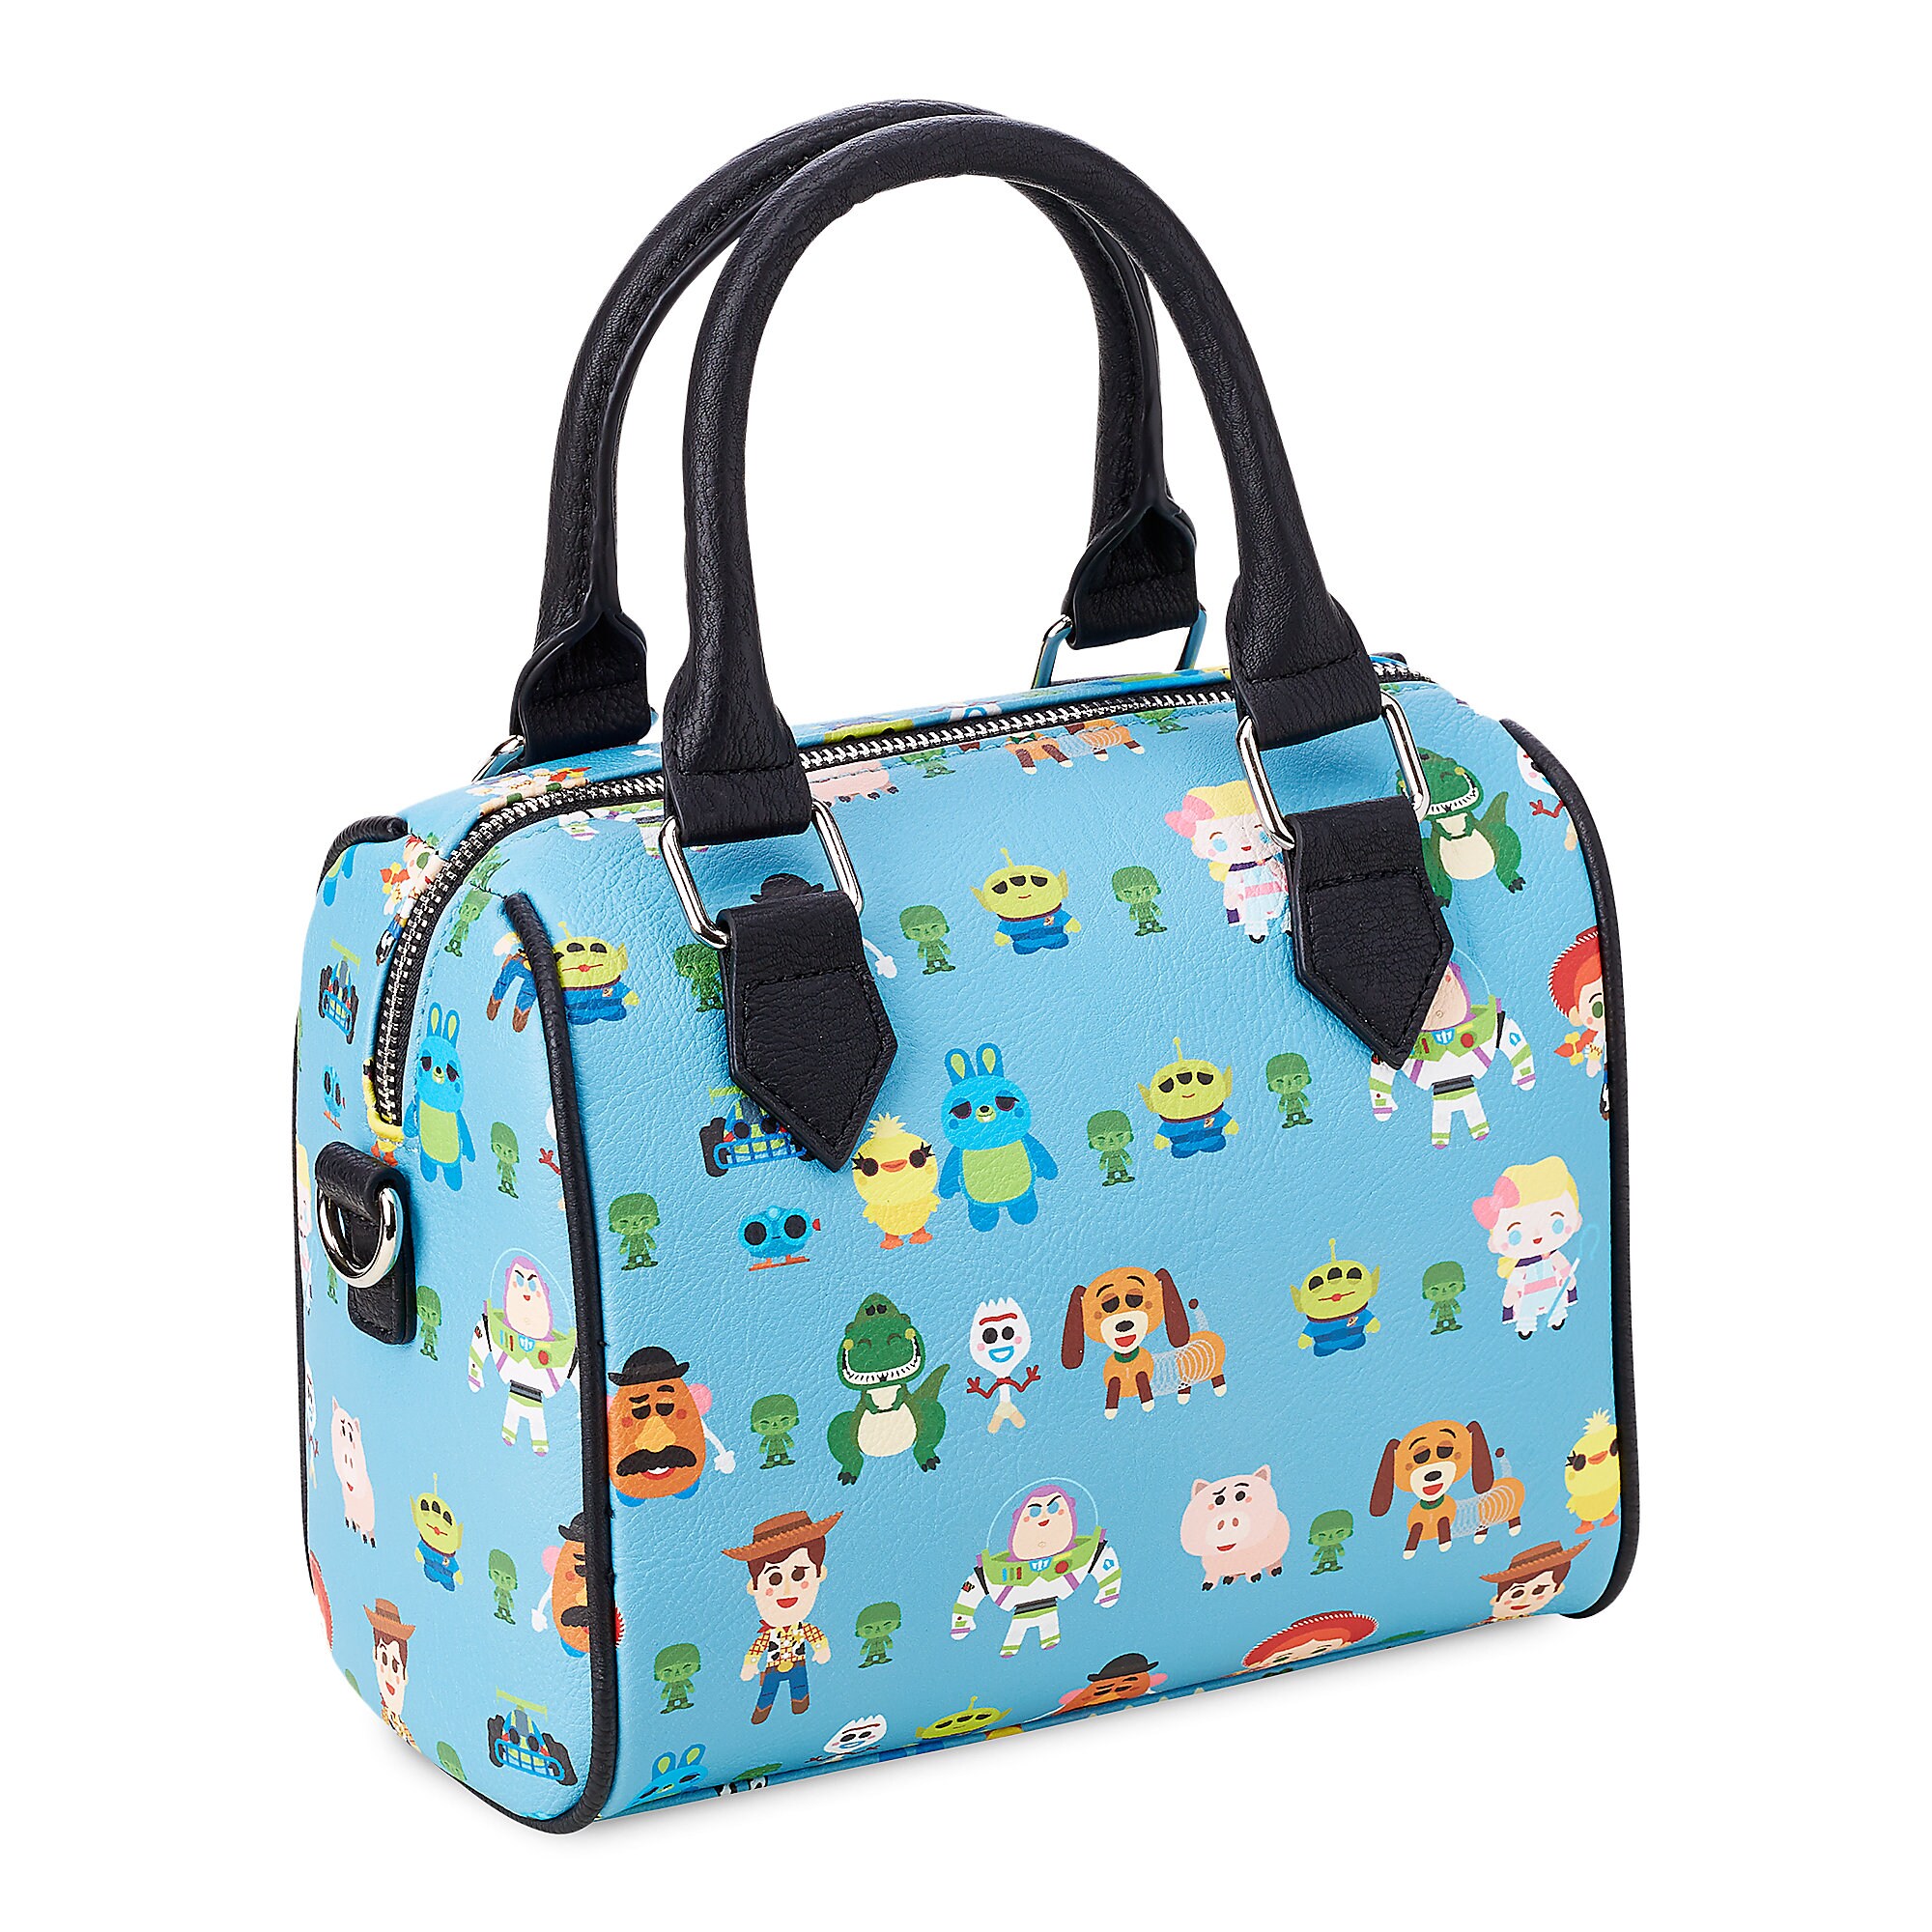 Toy Story 4 Duffel Bag by Loungefly